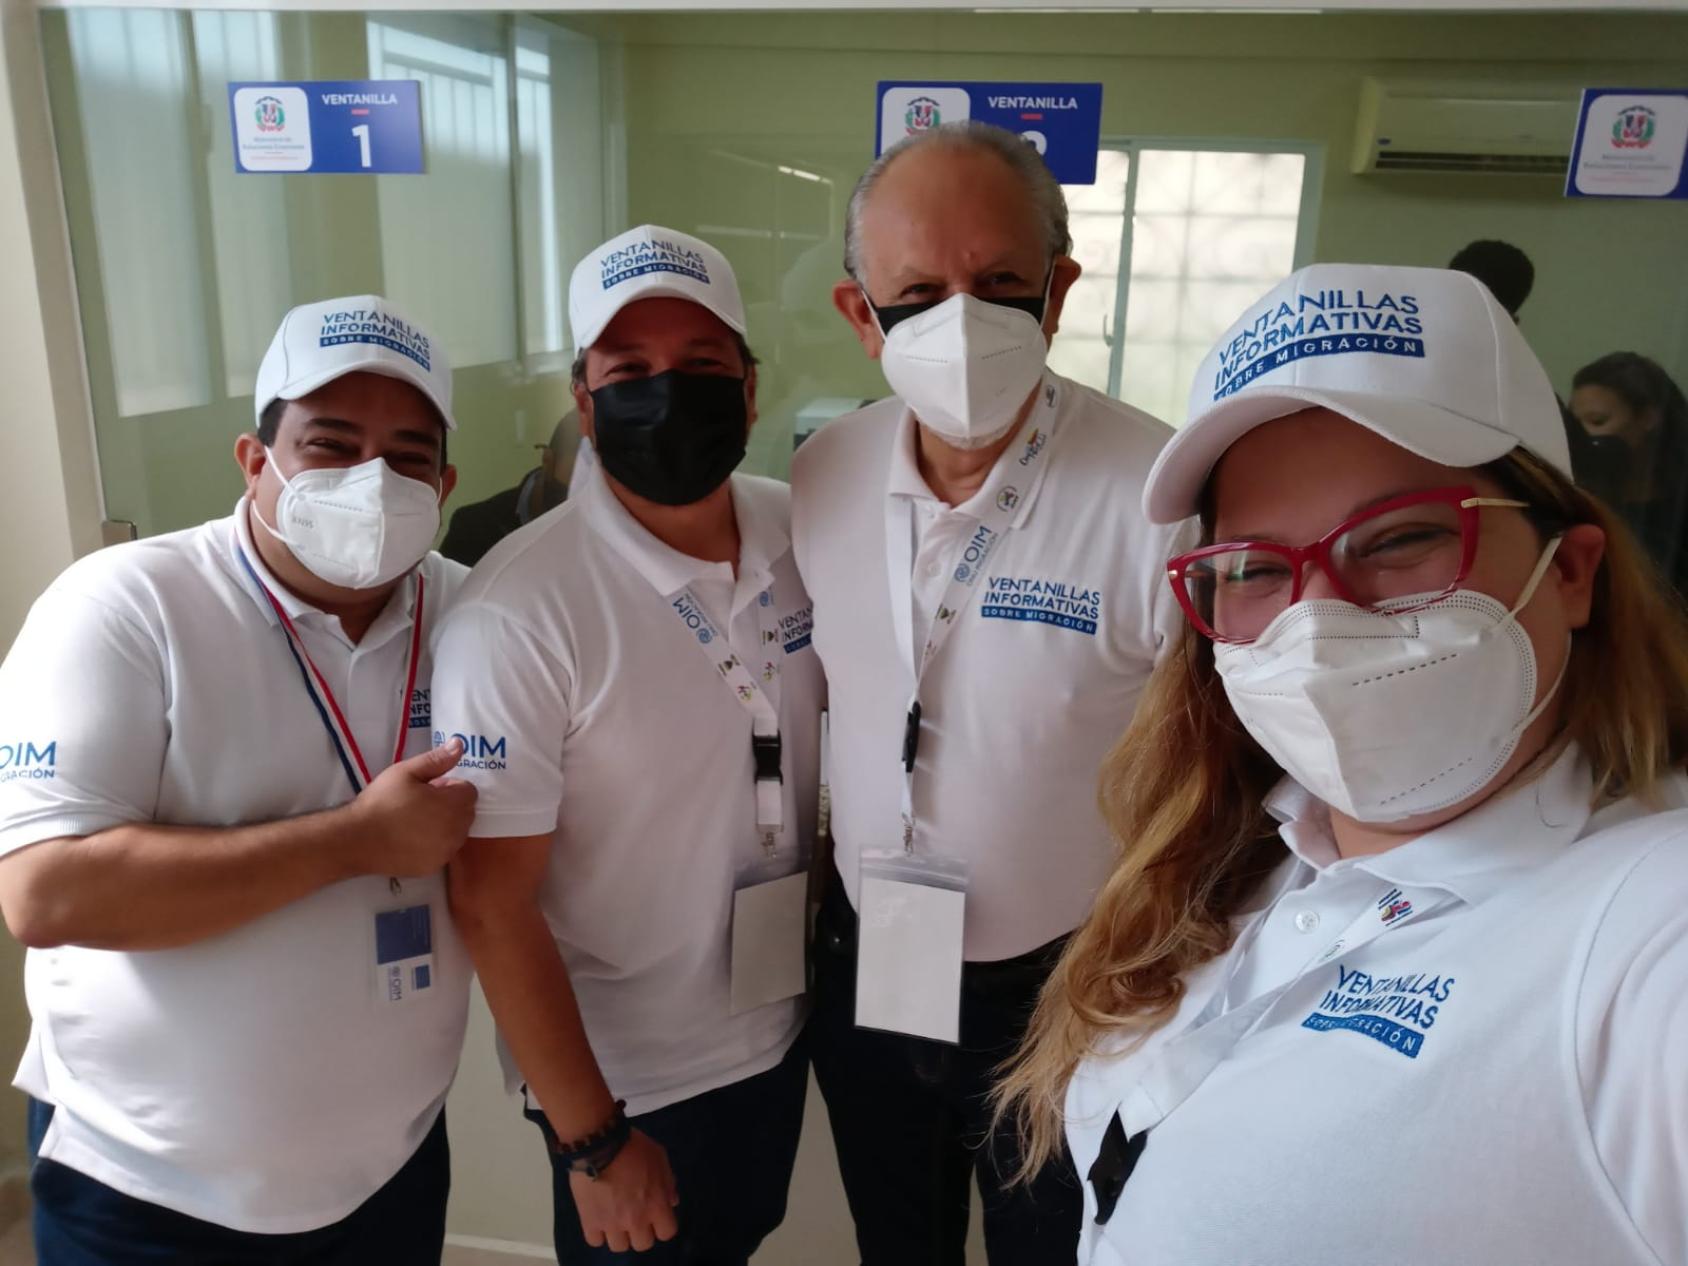 Three men and a woman, all wearing white IOM embroidered t-shirts and face mask, smile and pose for a selfie.